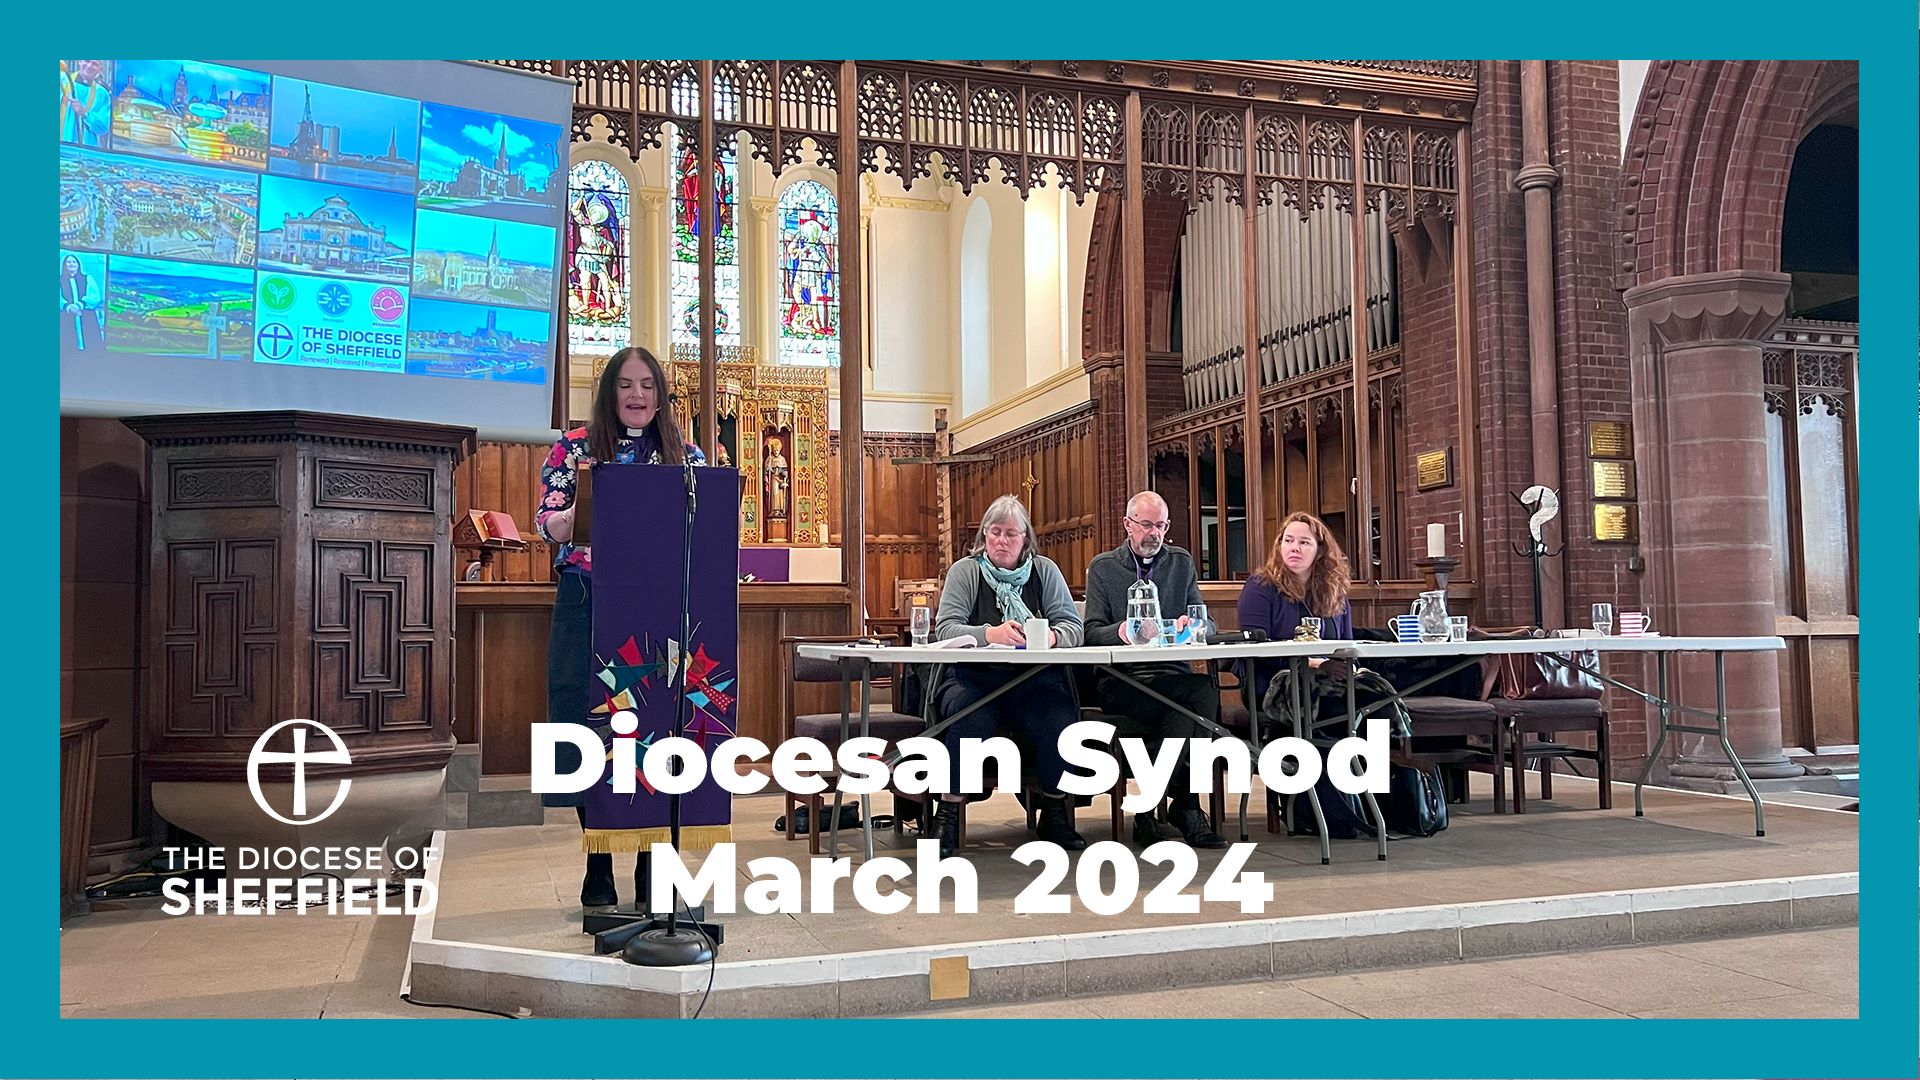 Bishop Sophie Jelley delivers Presidential Address at Diocesan Synod